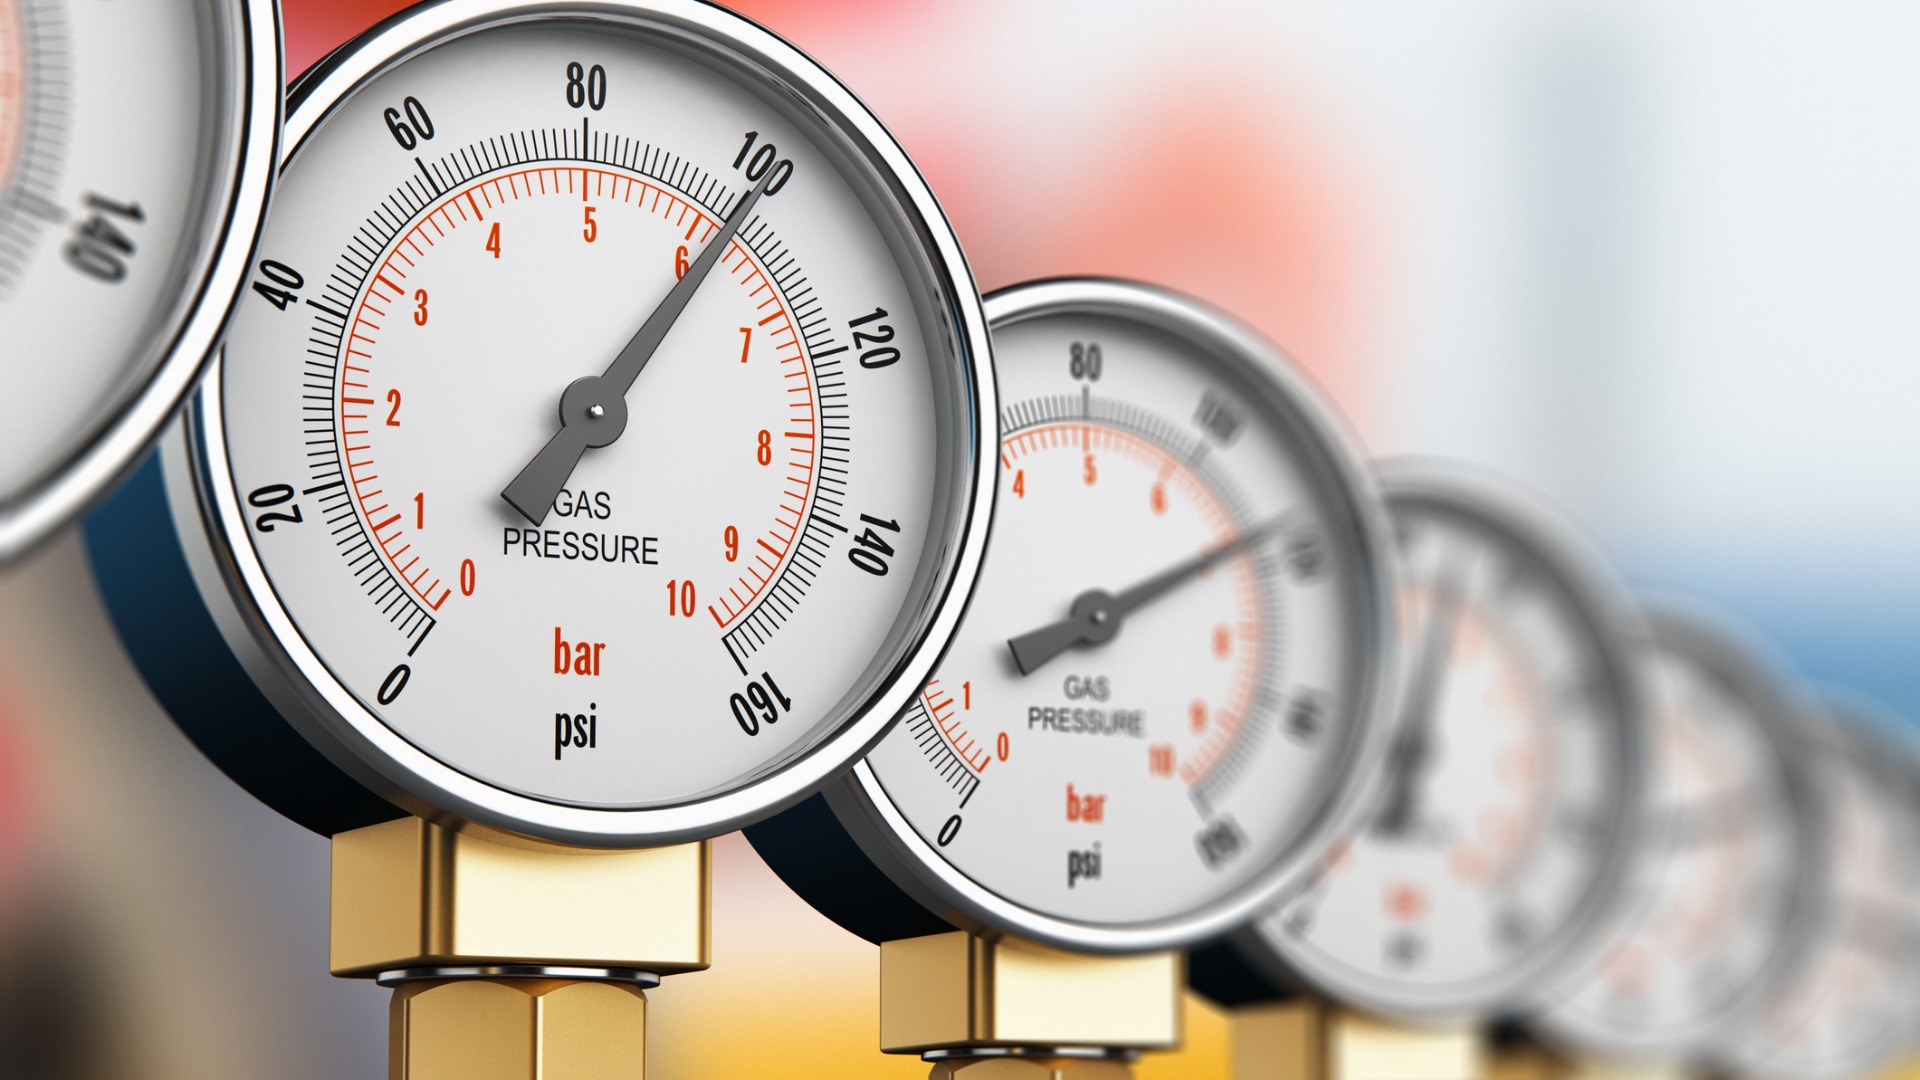 Row of industrial pressure gauges - What Is Compressed Natural Gas & Why Is it Important?